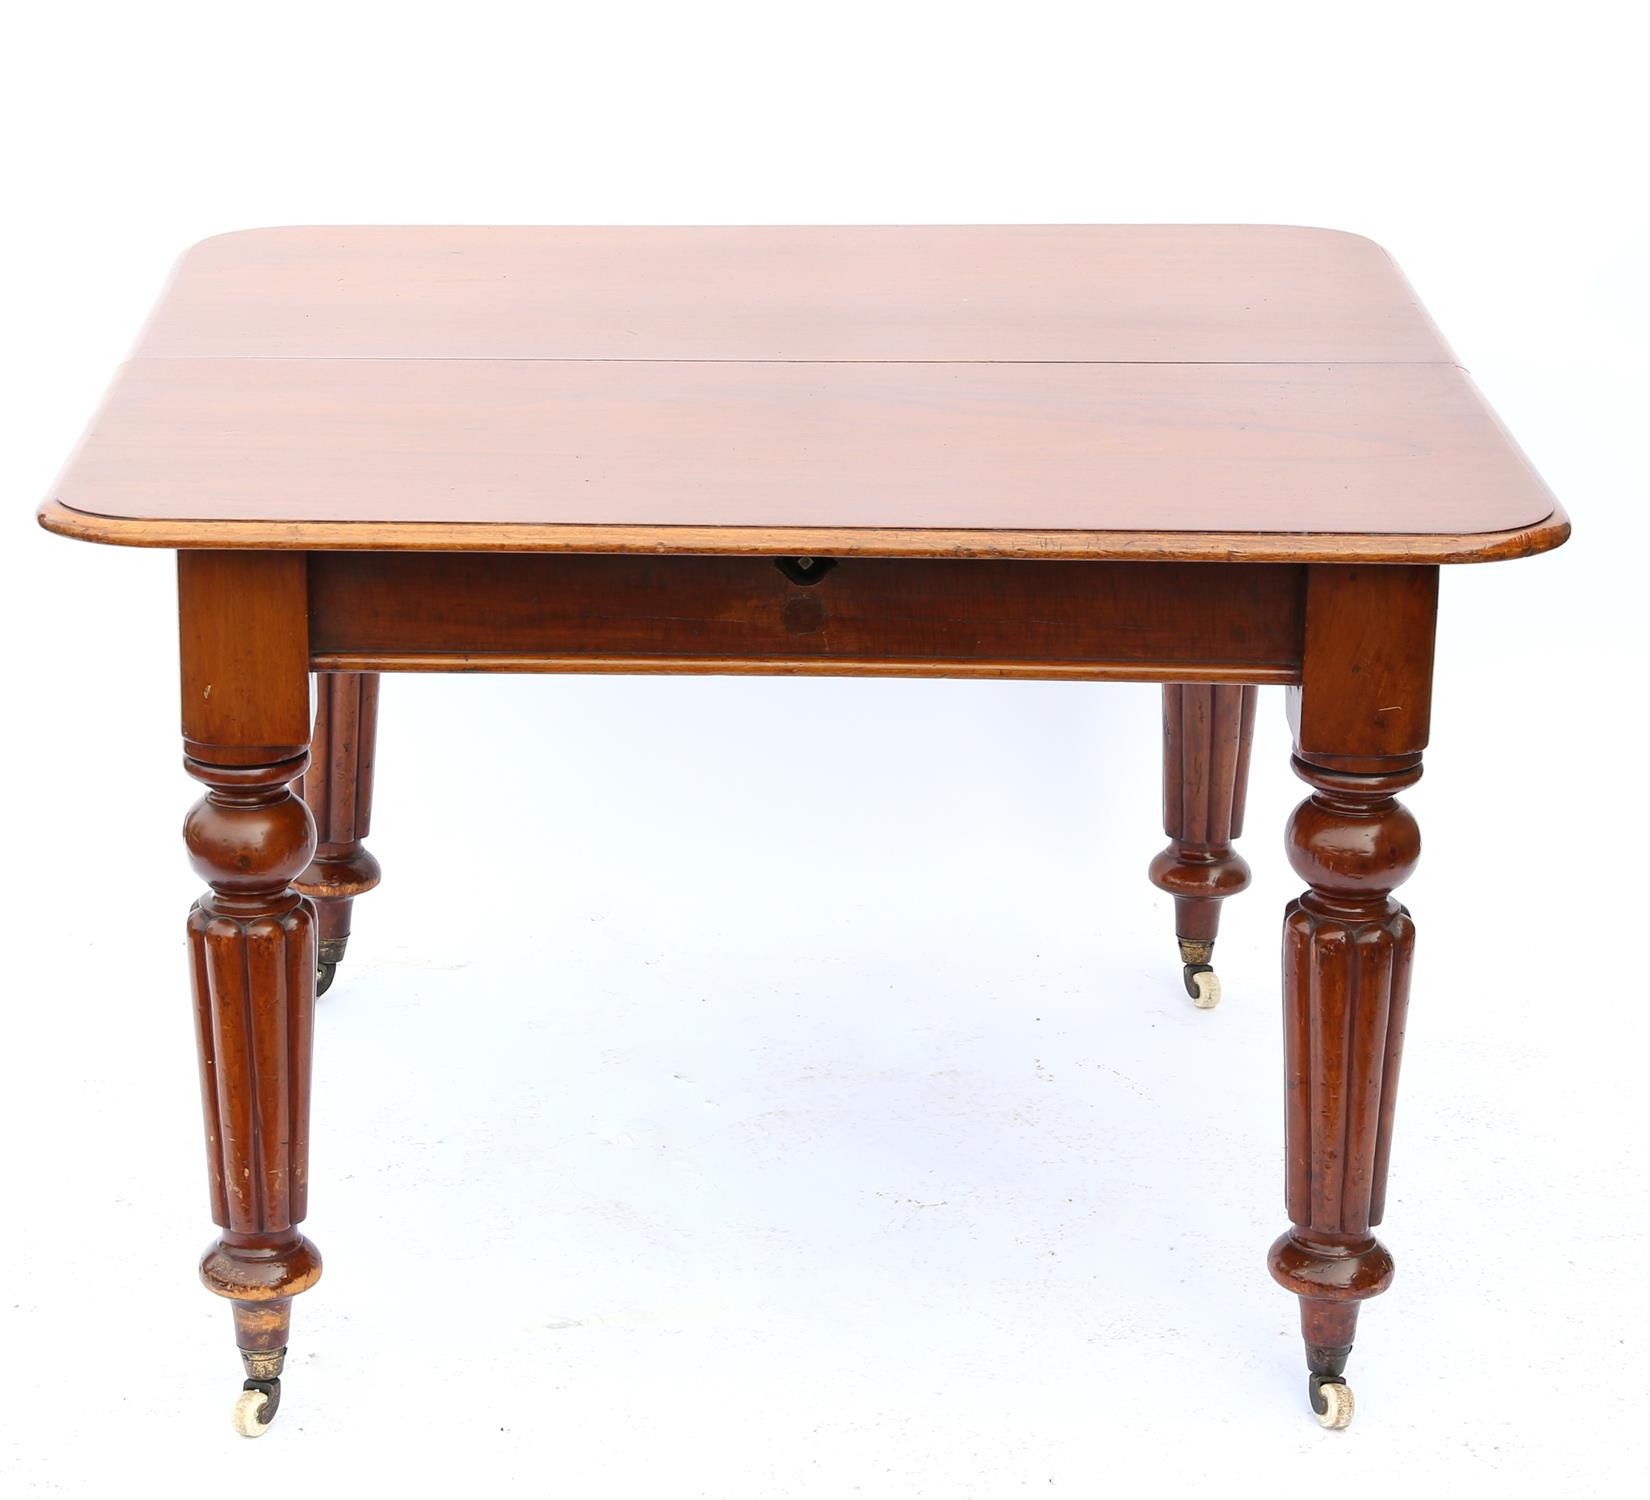 19th century mahogany extending dining table with three extra leaves, on reeded legs and castors,